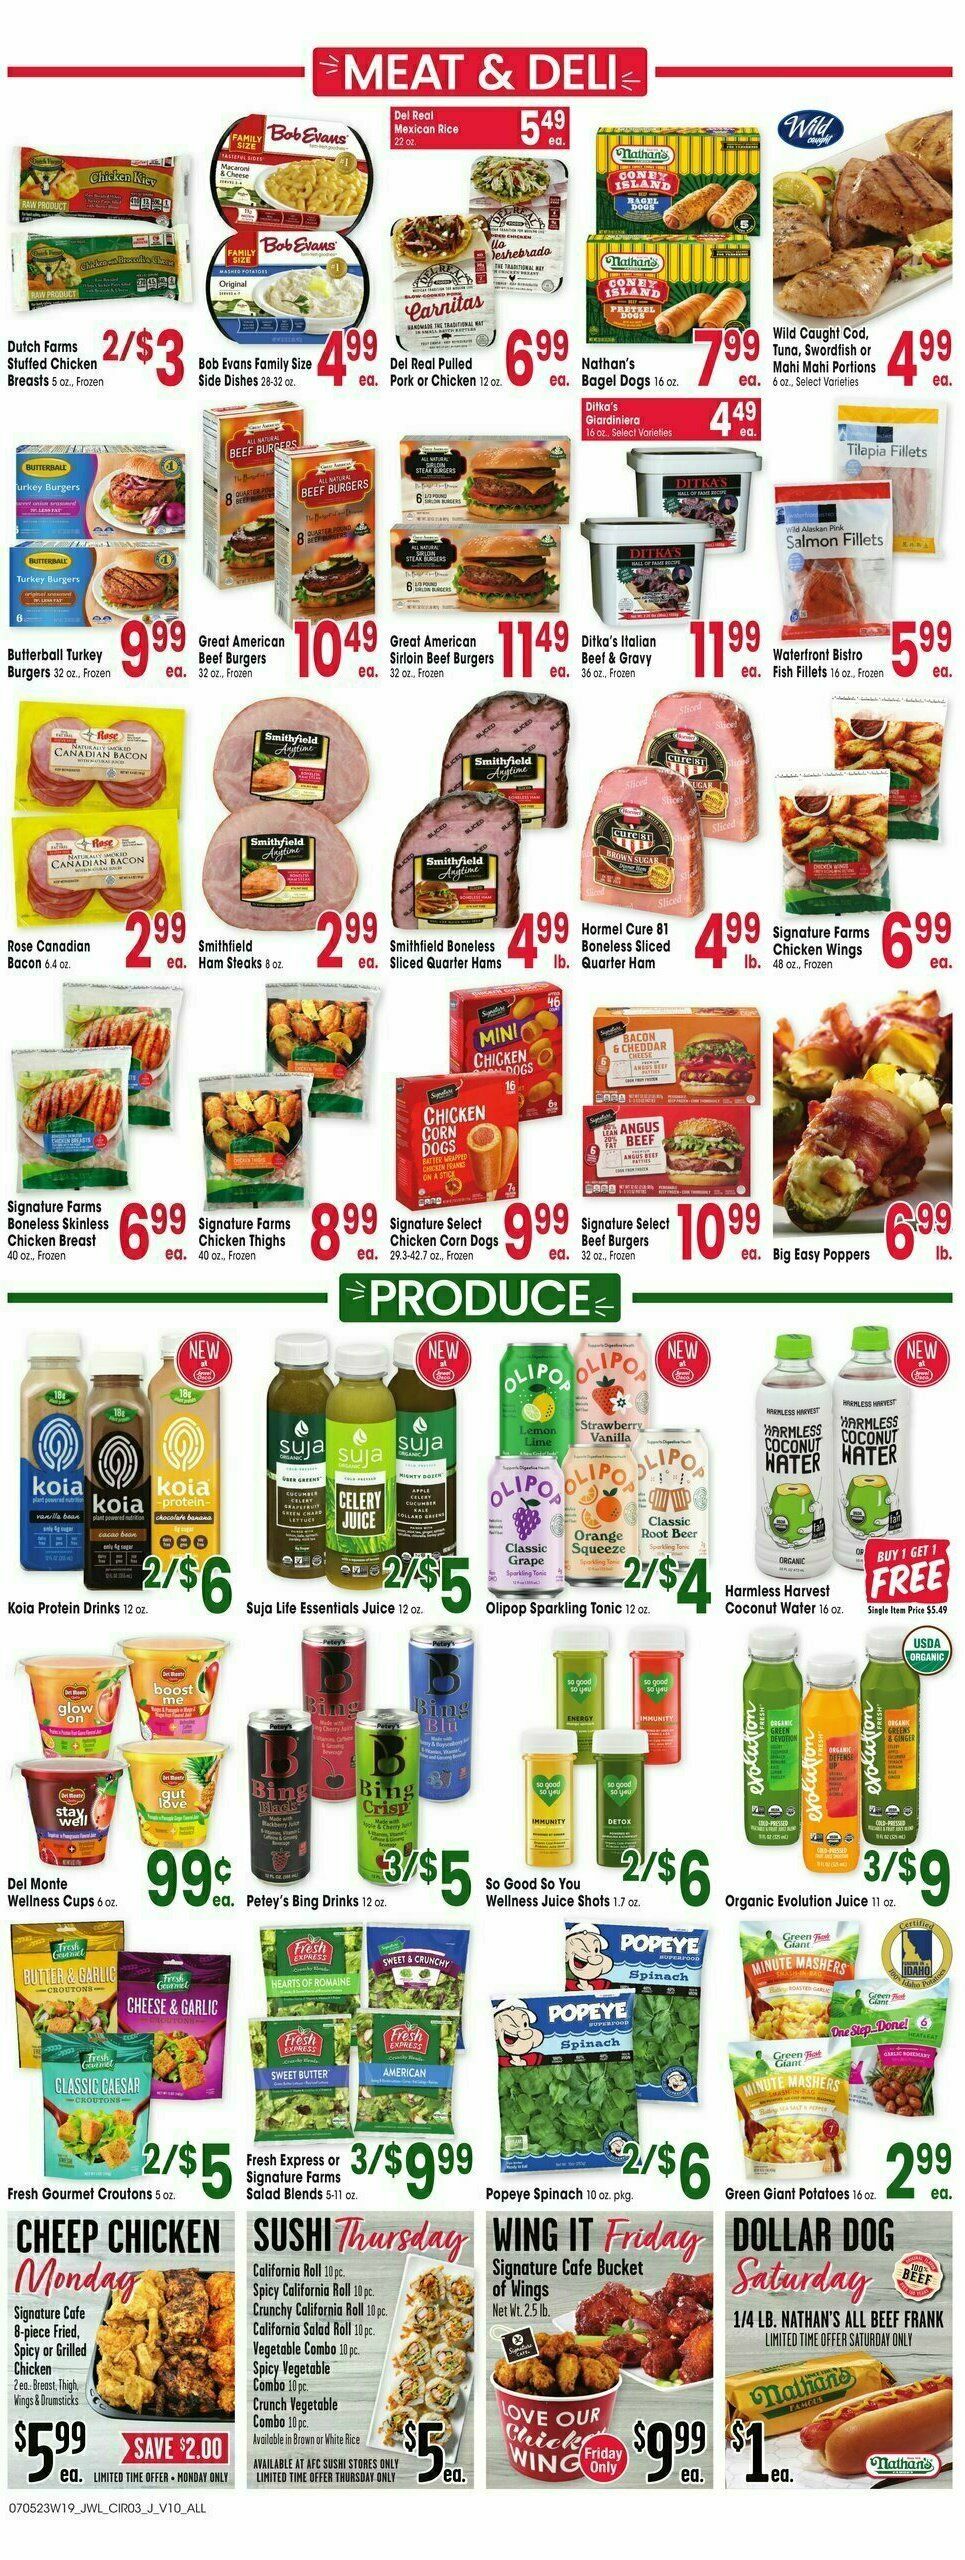 Jewel Osco Weekly Ad from July 5